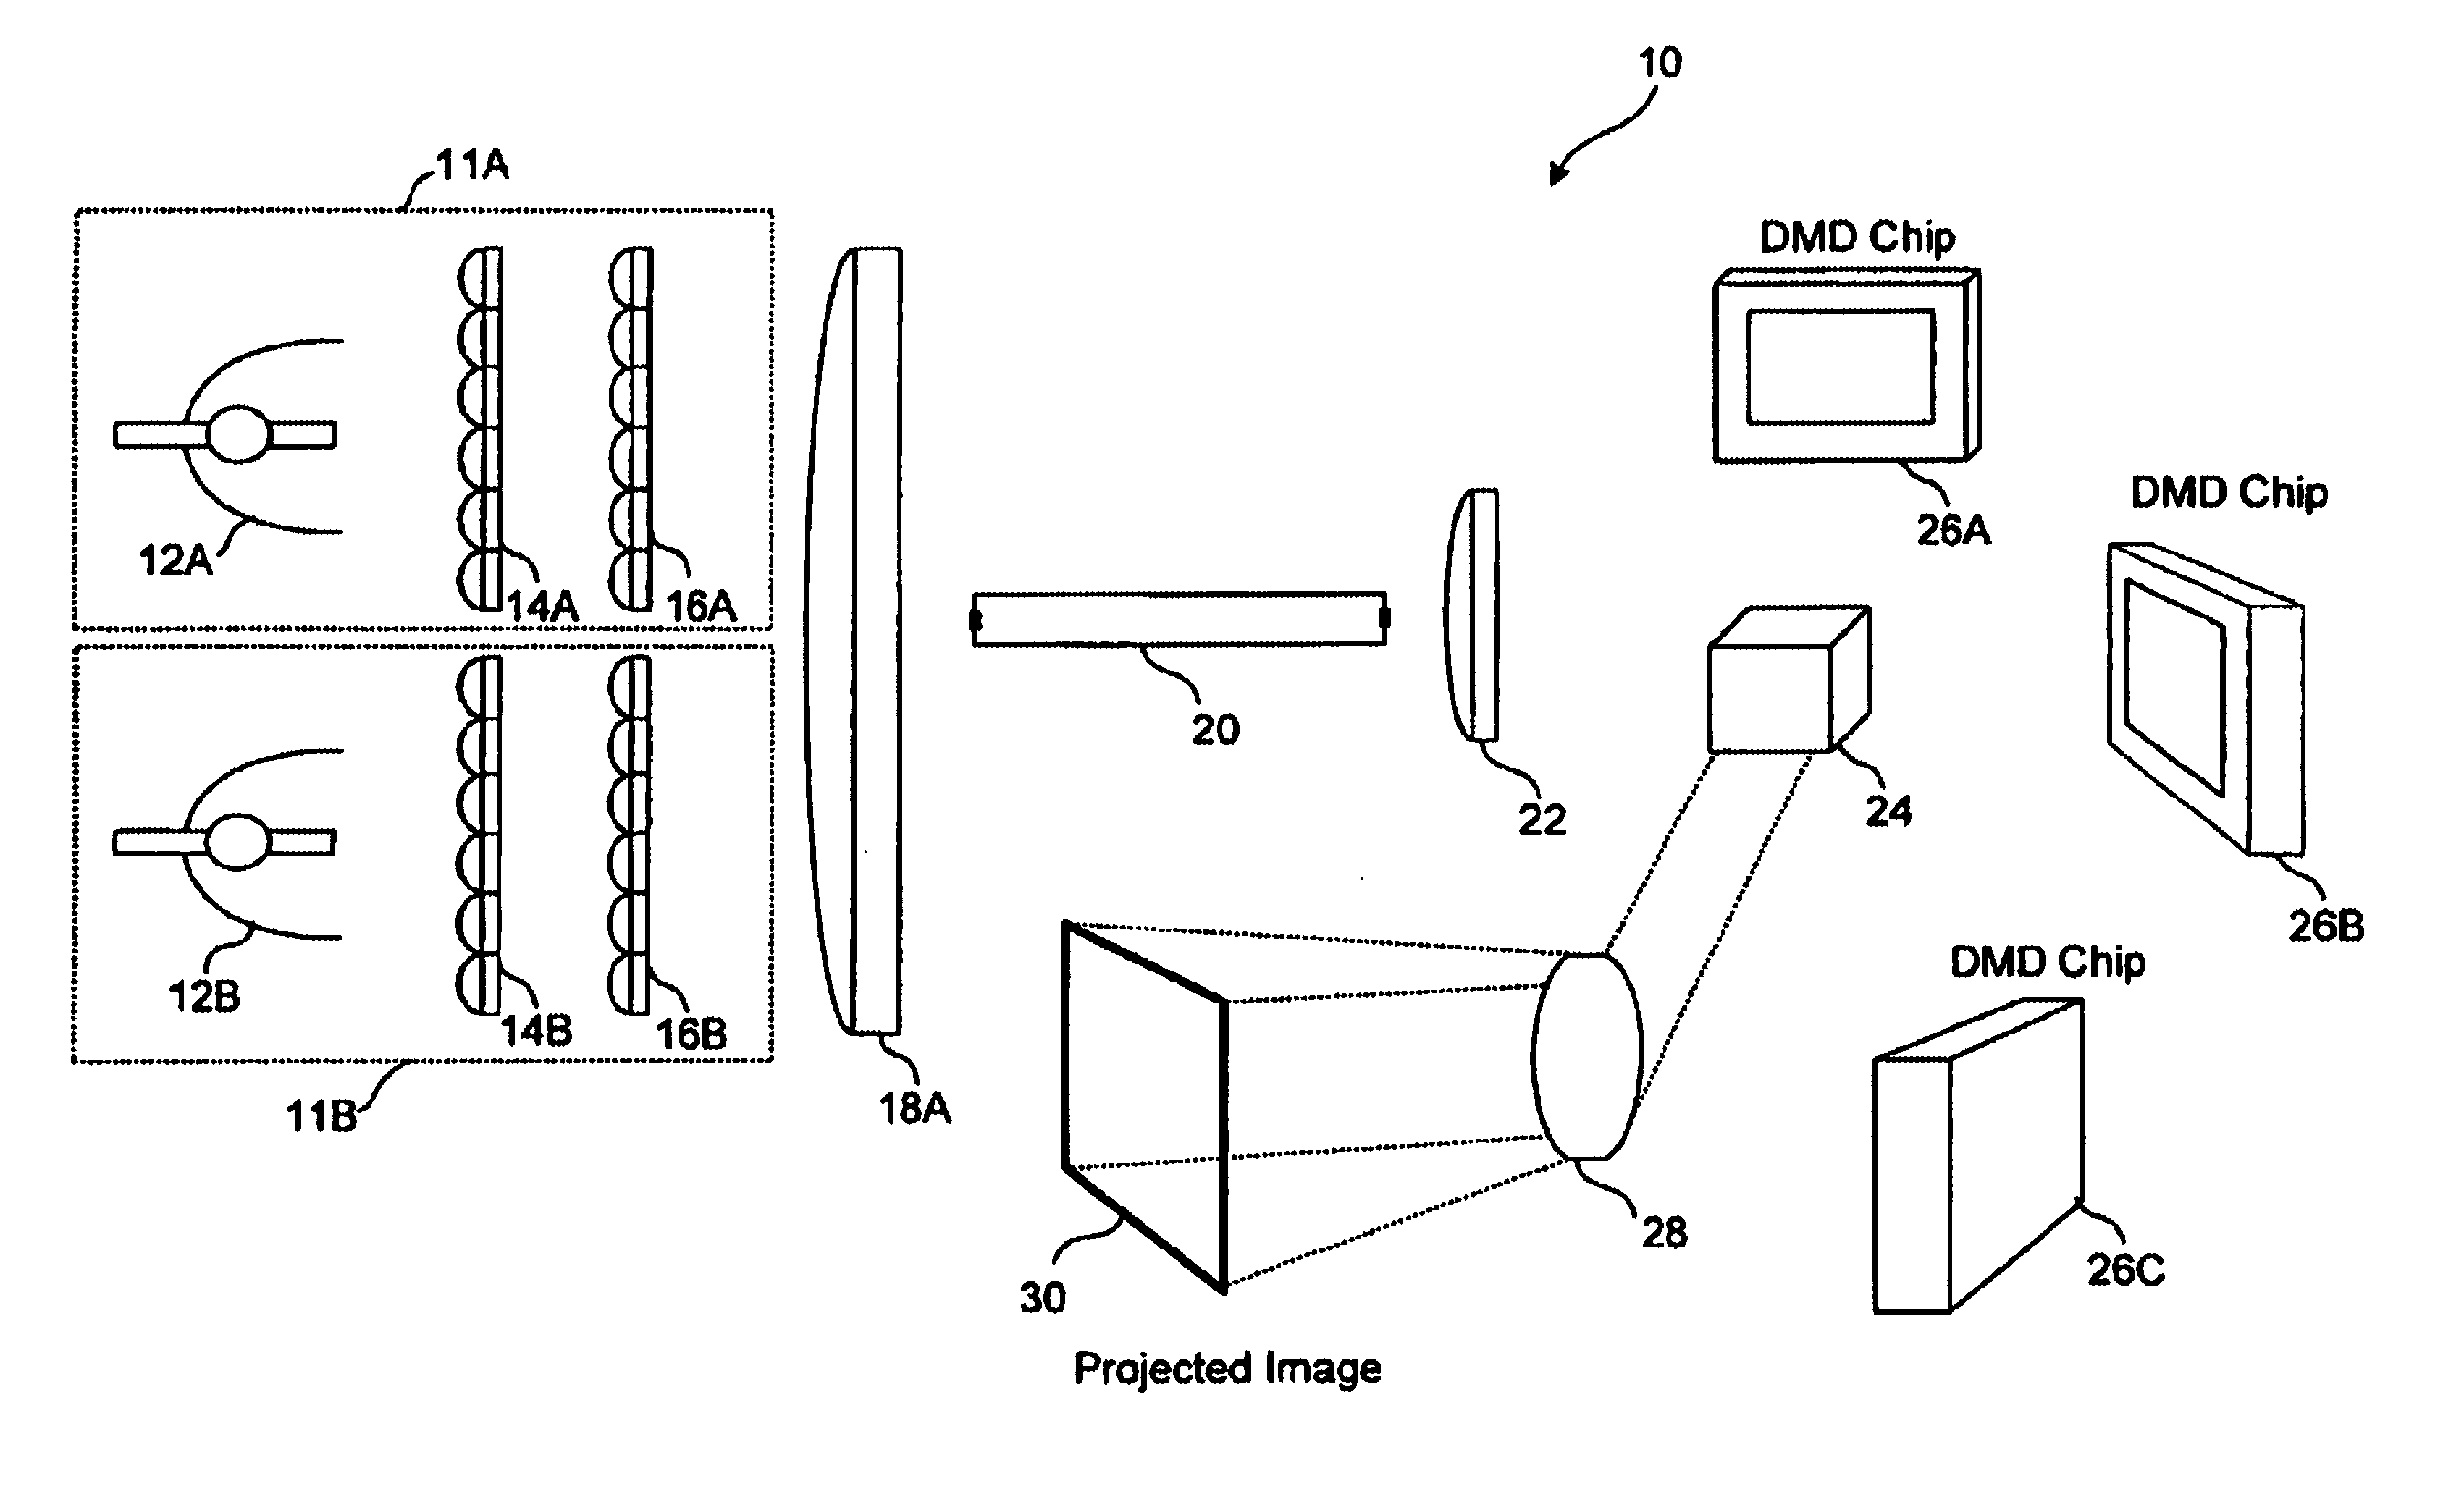 Illumination system for a projection system